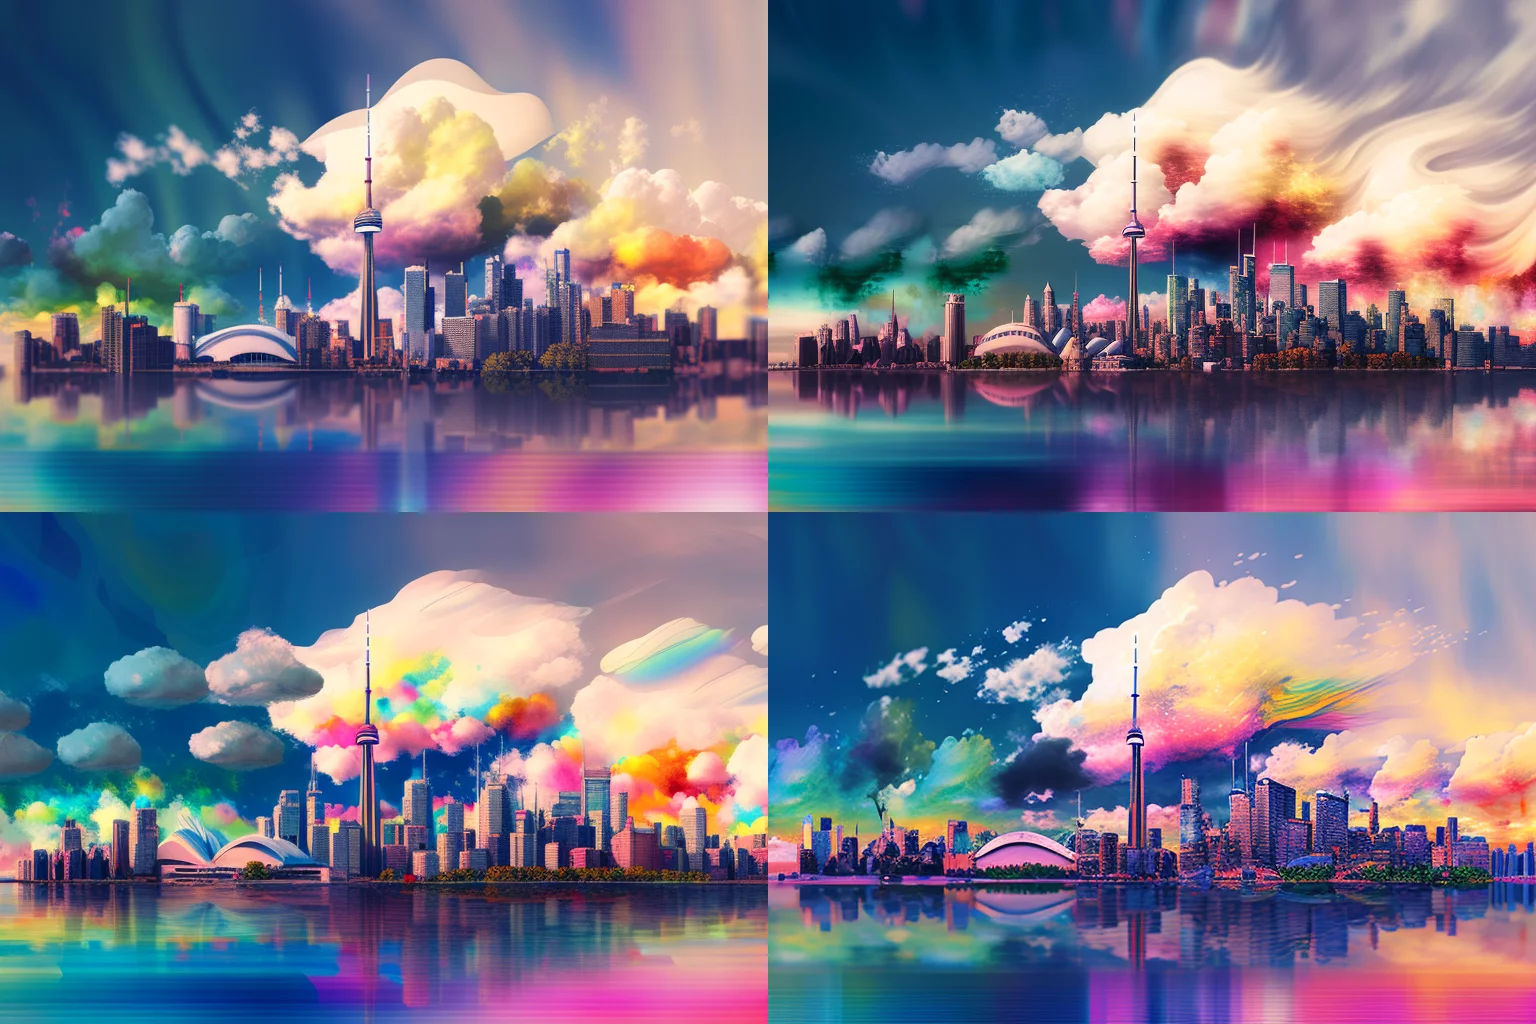 Toronto skyline with colorful clouds